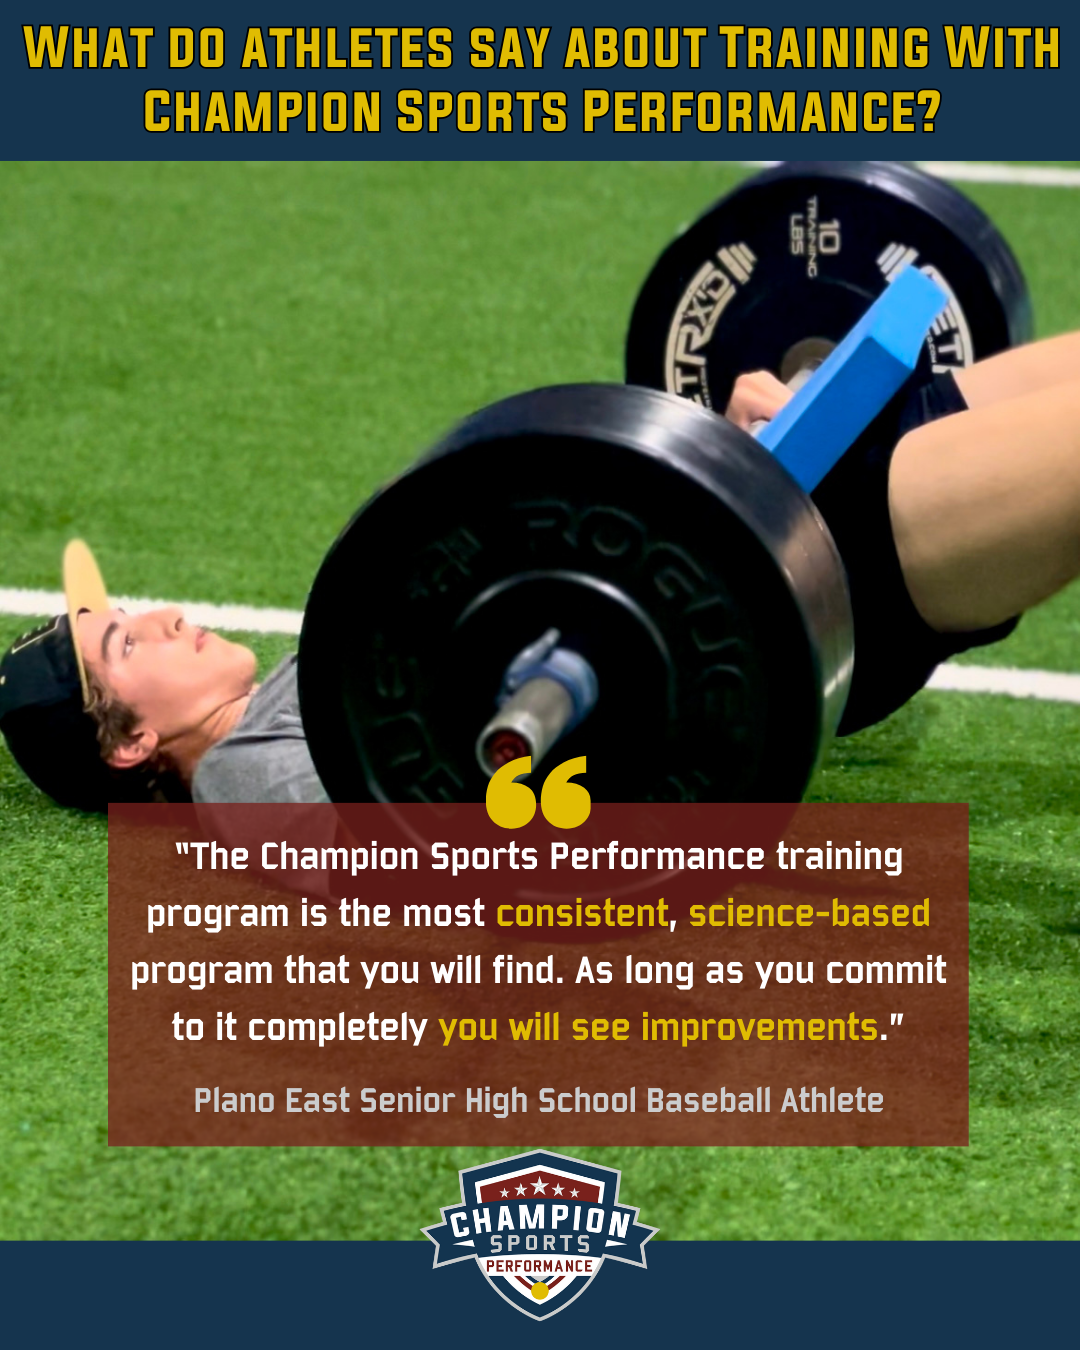 PESH Baseball - The Champion Sports Performance training program is the most consistent, science-based program that you will find. As long as you commit to it completely you will see improvements.